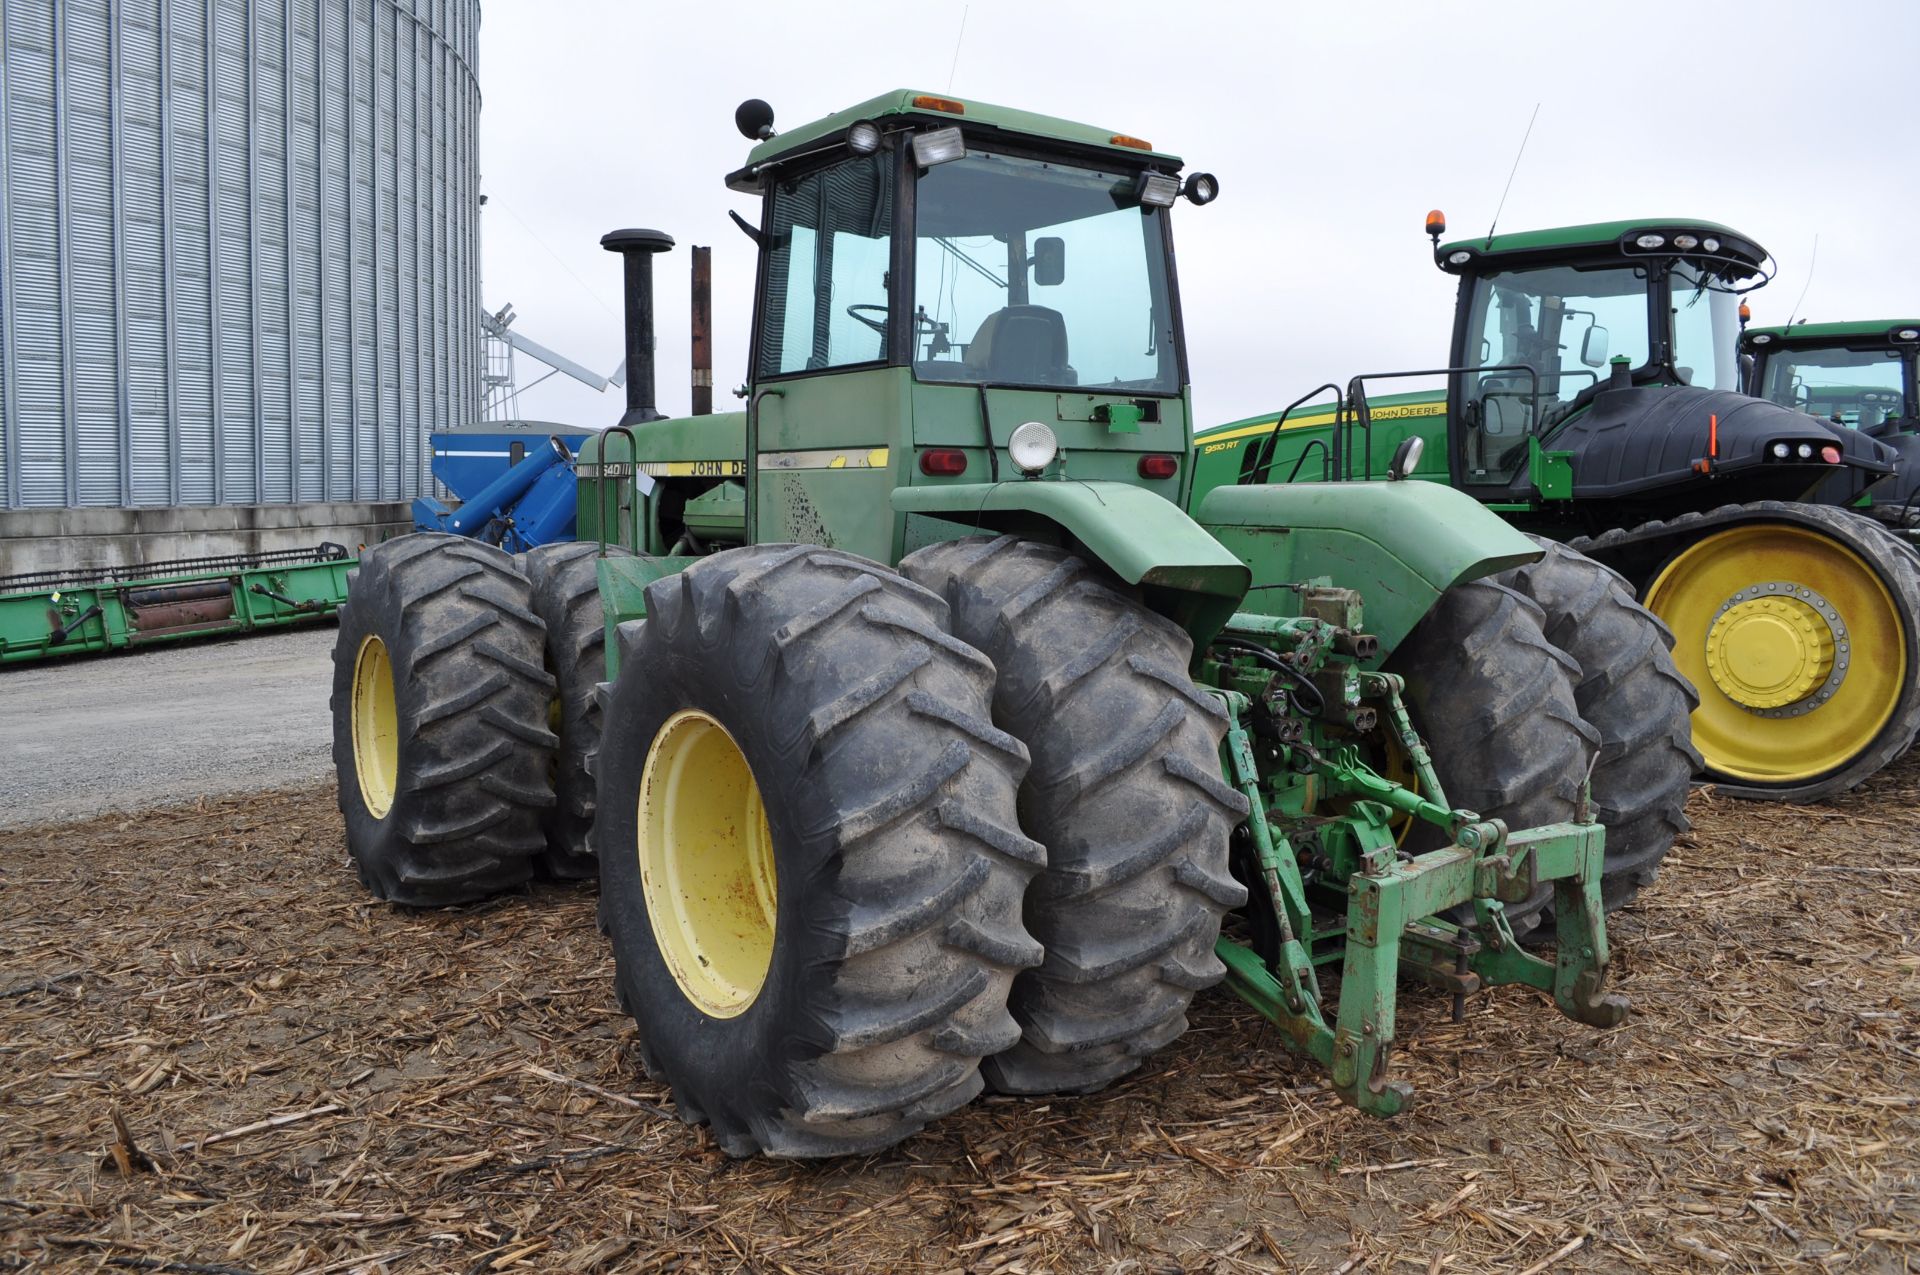 John Deere 8630 4WD tractor, 23.1-30 duals, 3 hyd remotes, 3 pt, quick hitch, 1000 PTO - Image 4 of 30